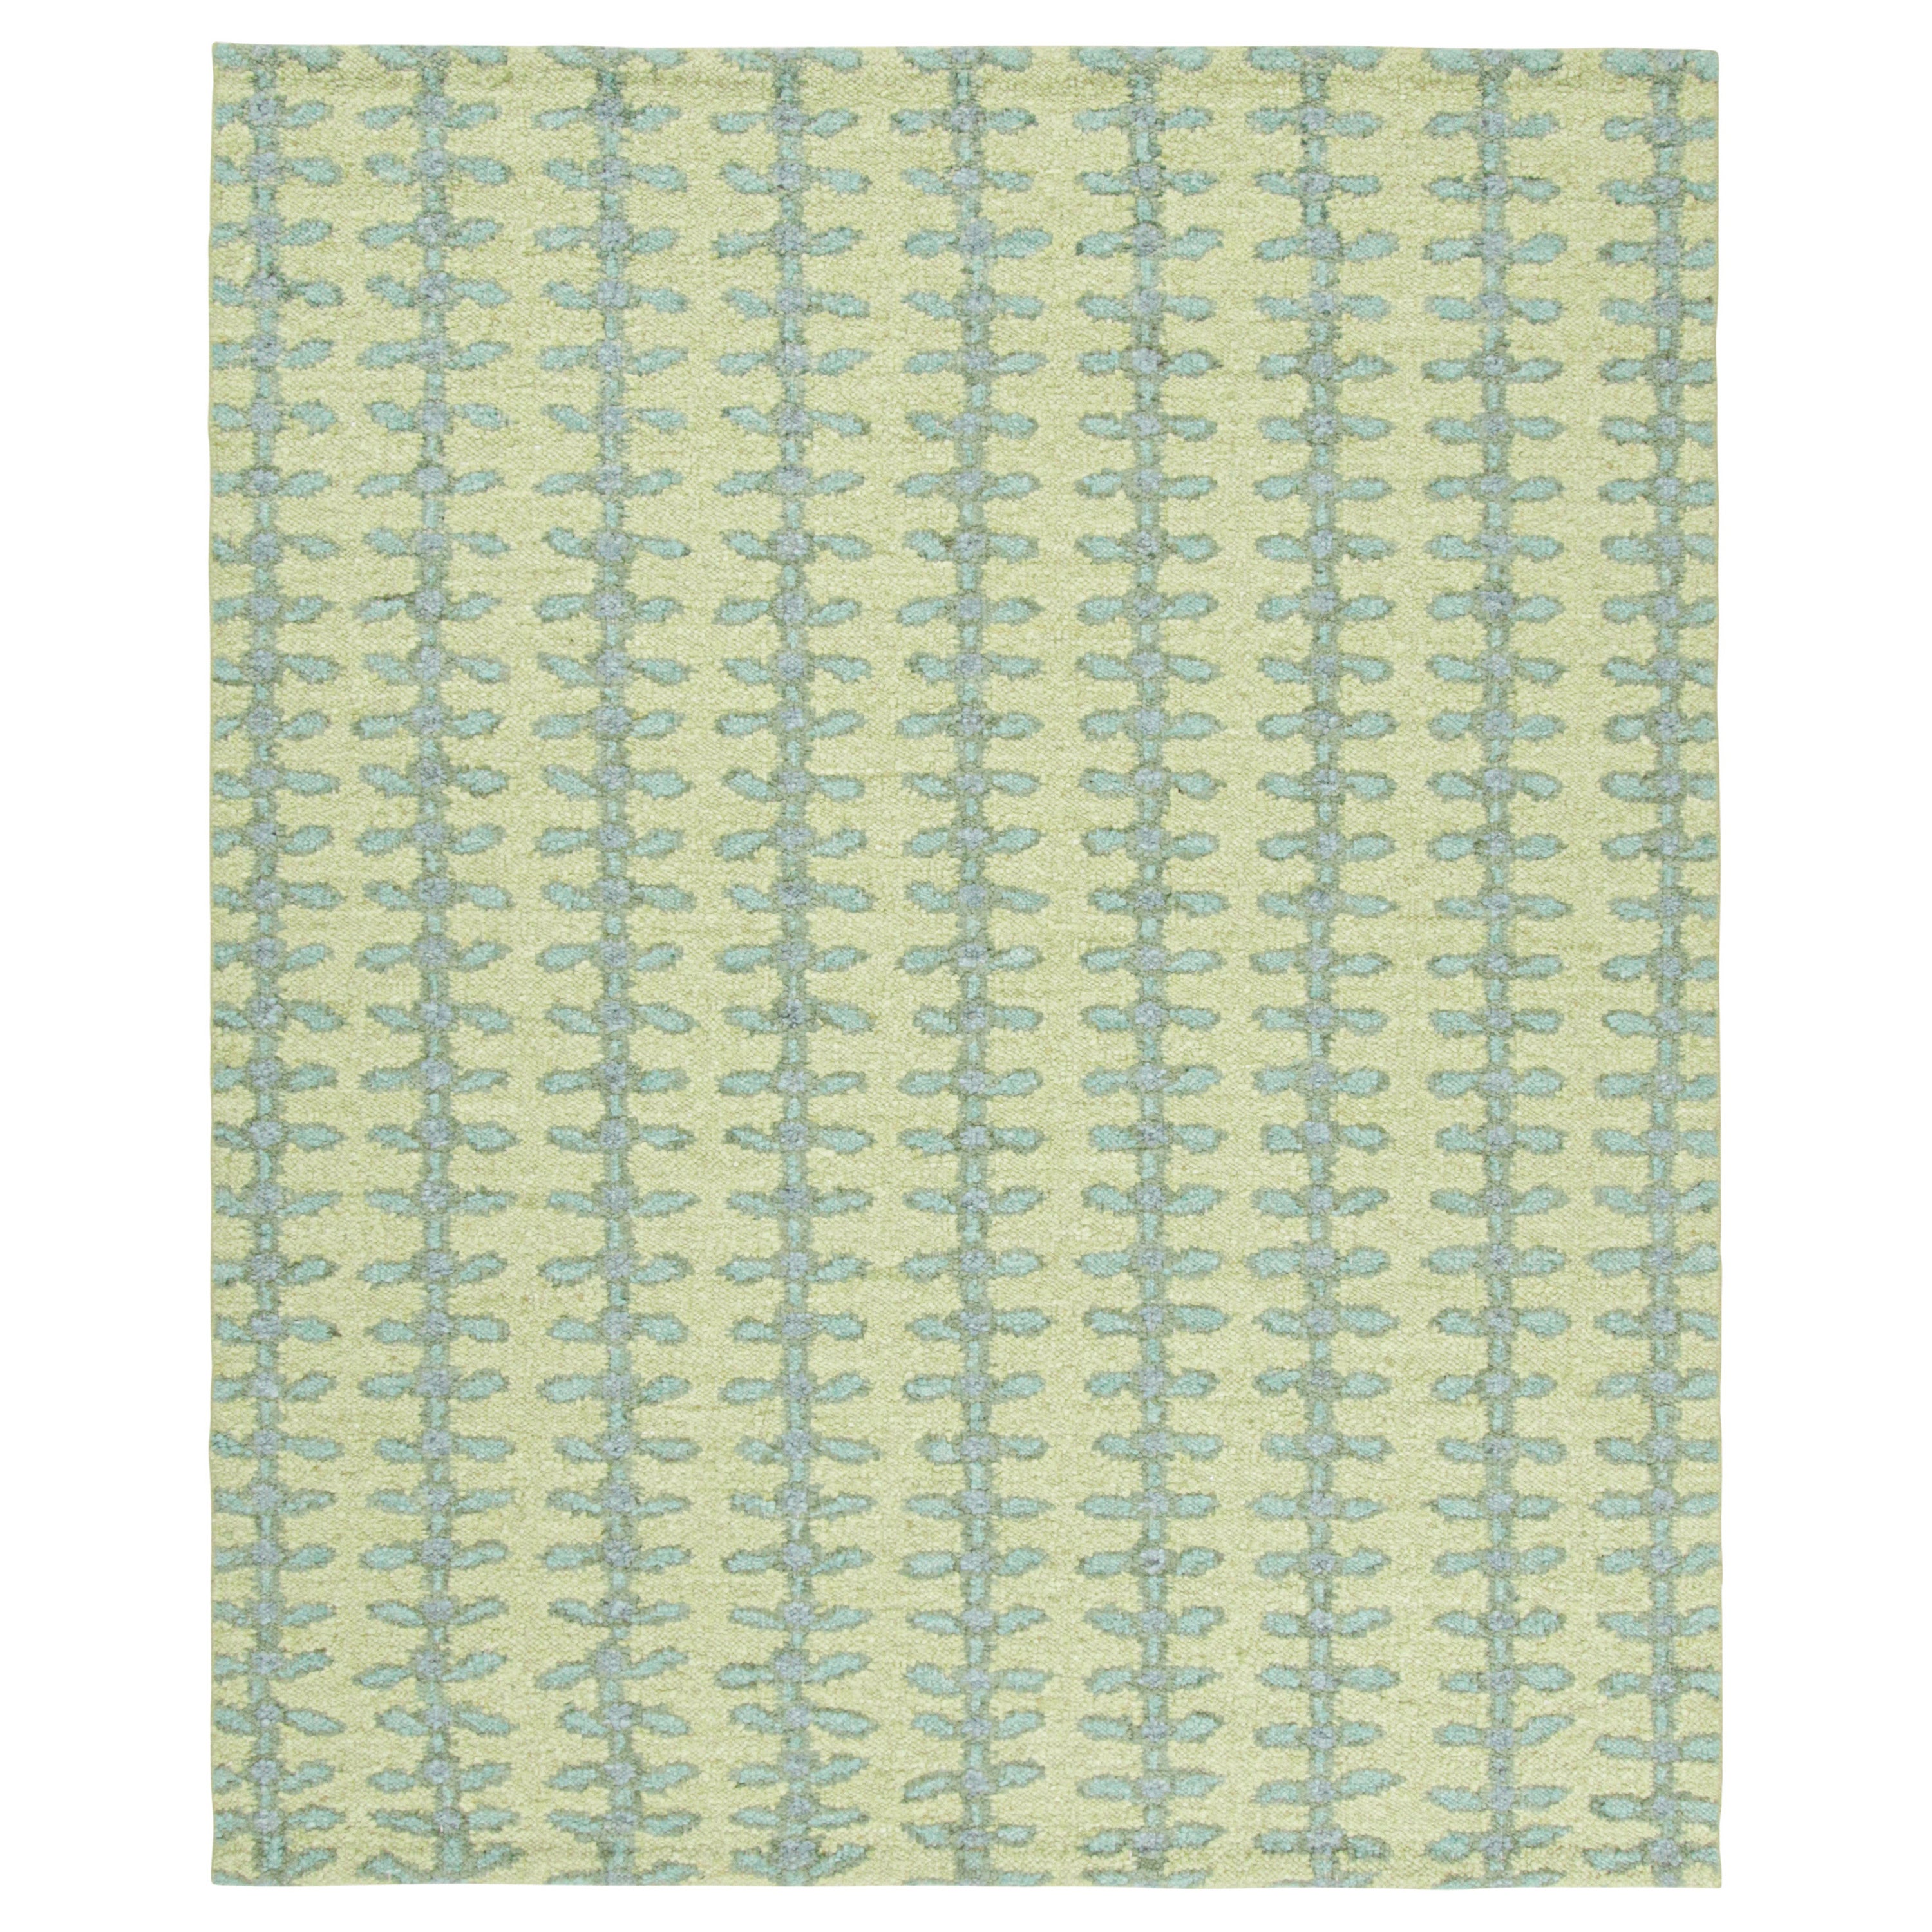 Rug & Kilim’s Scandinavian Style Rug with Green and Blue Floral Pattern